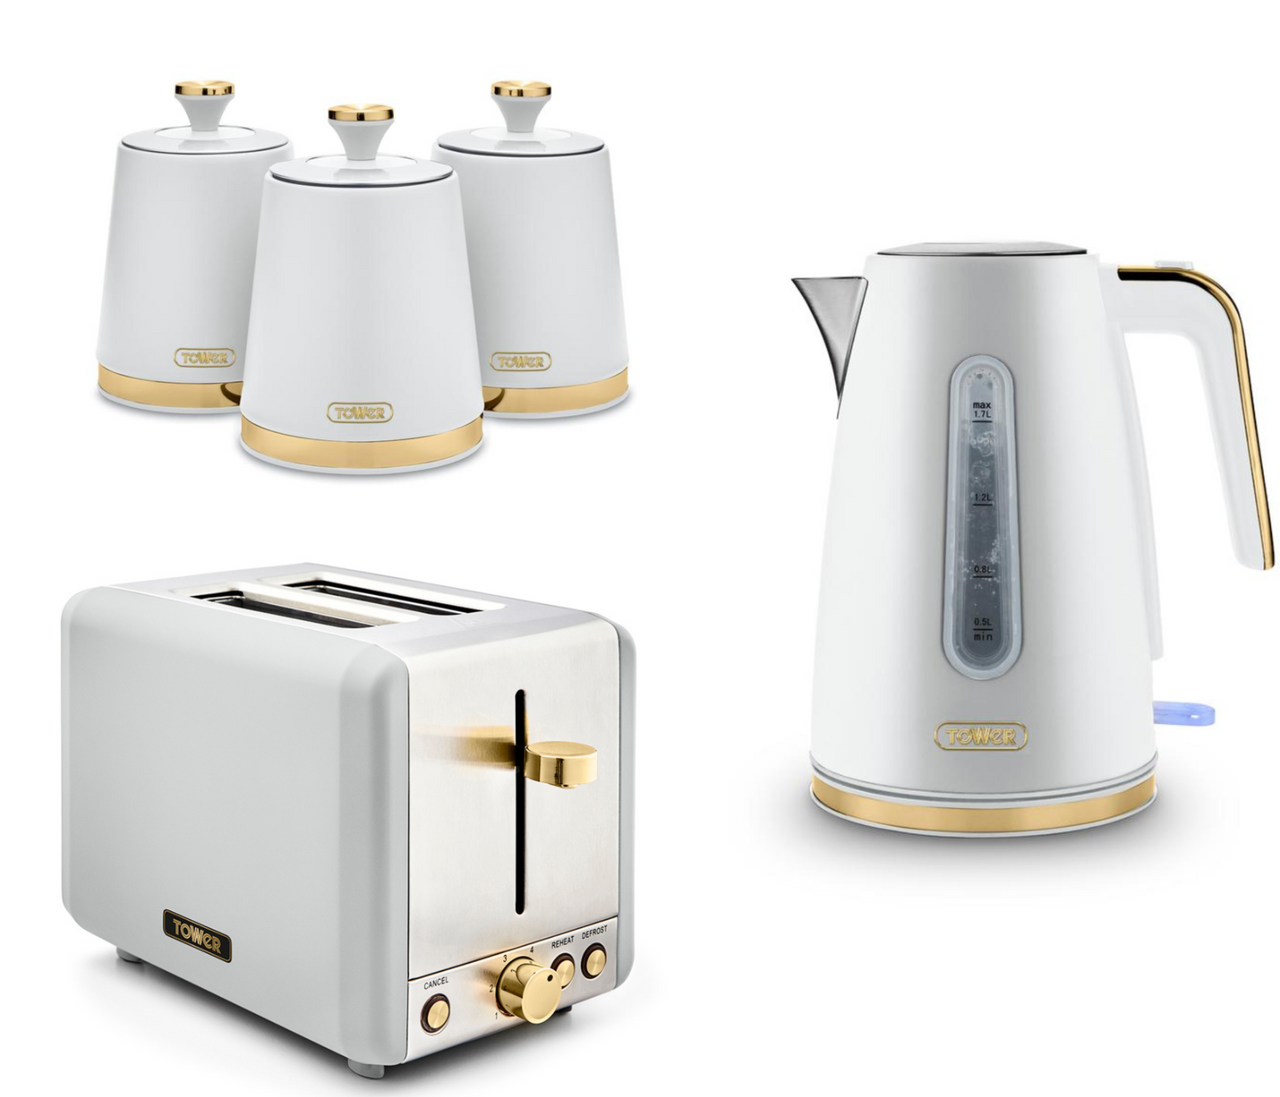 Tower Cavaletto White Jug Kettle, 2 Slice Toaster & Canisters Matching Kitchen Set